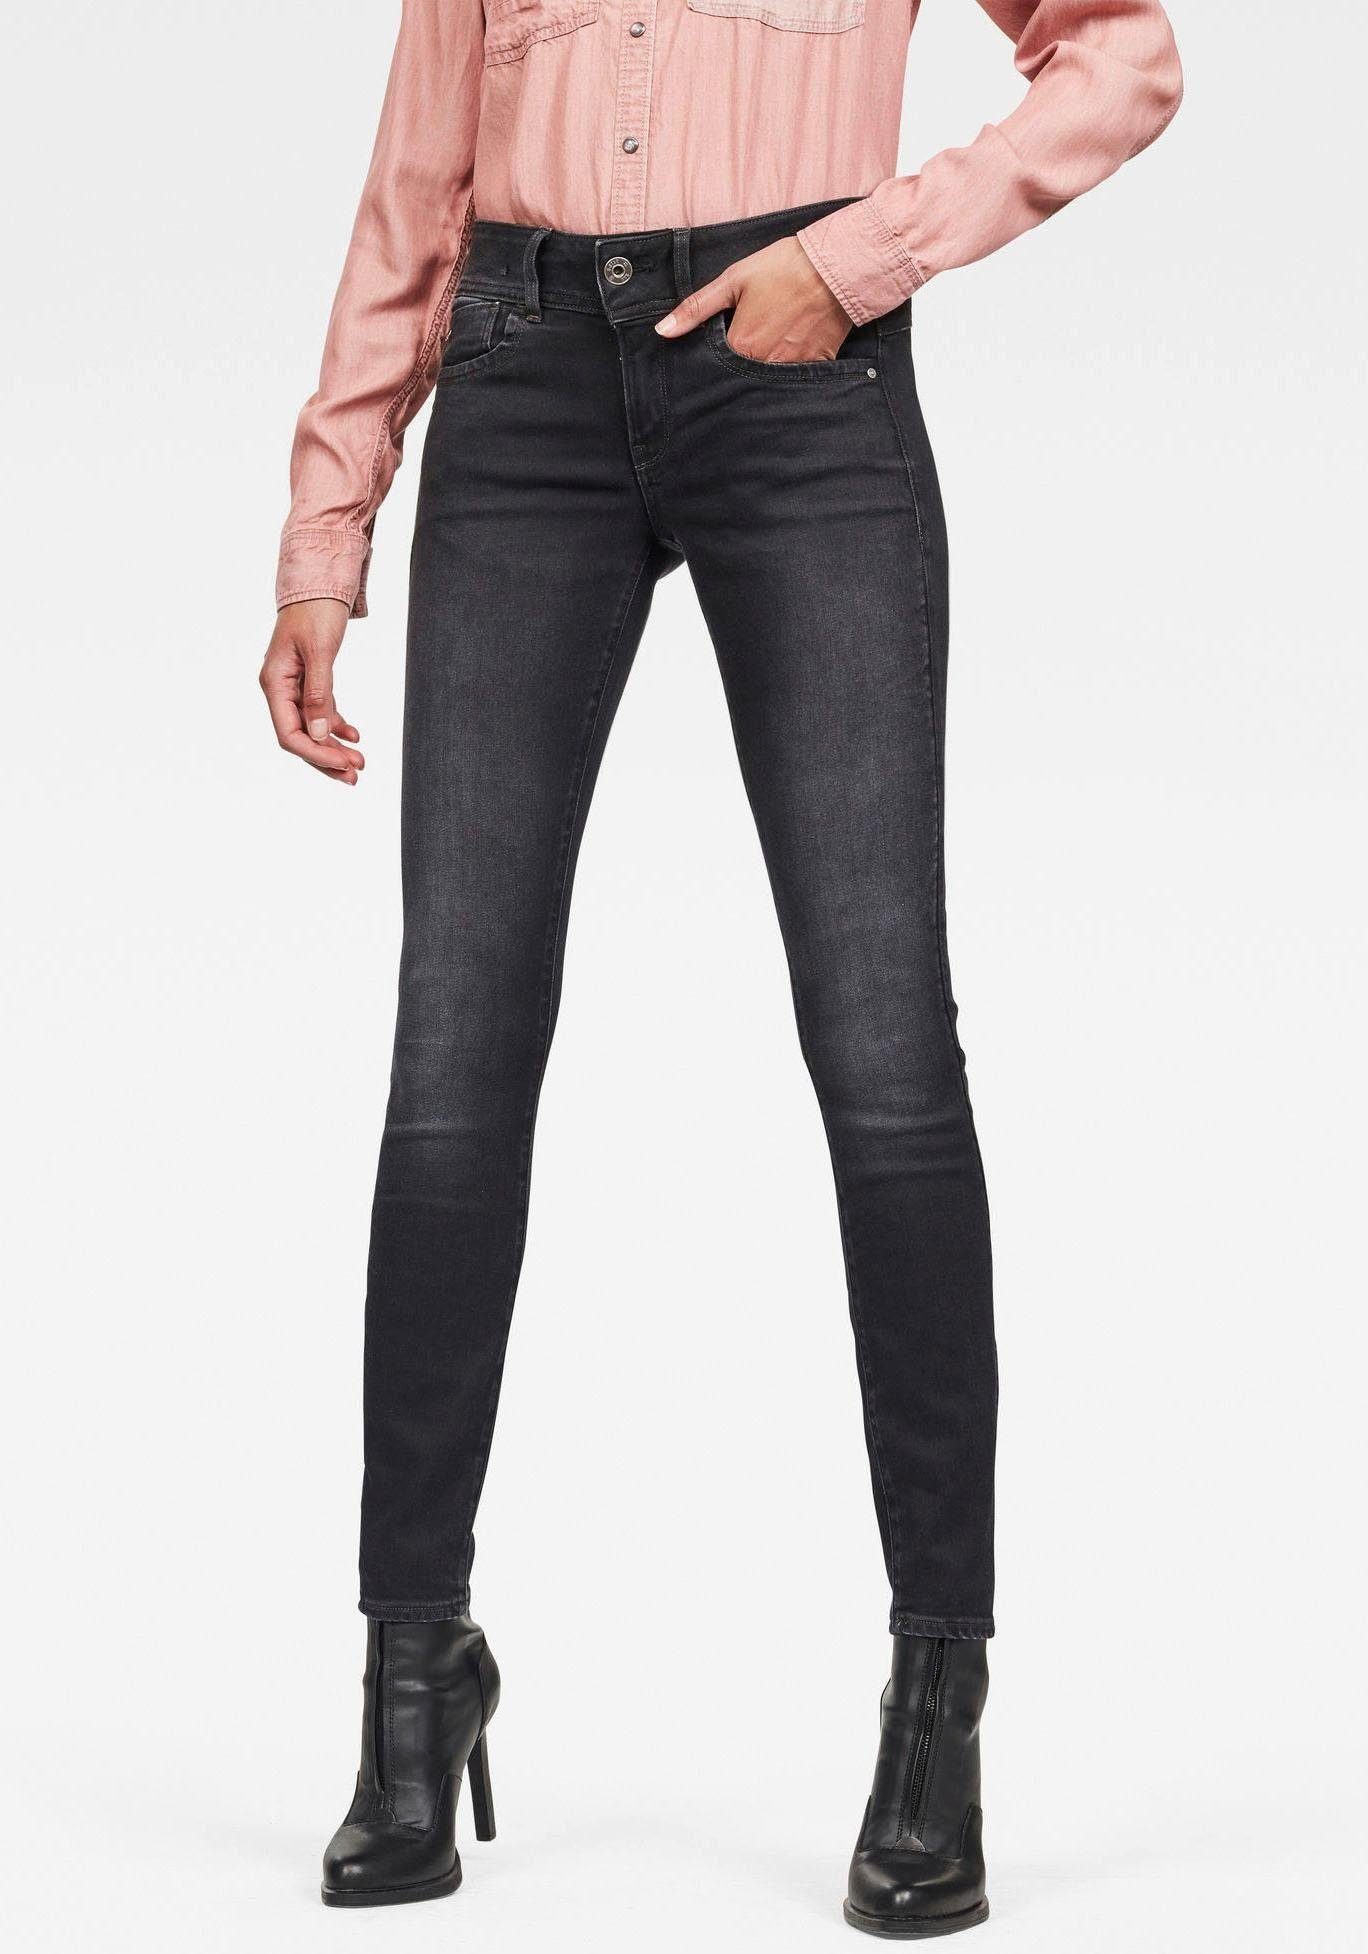 Skinny-fit-Jeans Taille Skinny mittelhoher G-Star Waist fit Mid in RAW Form Elasthan-Anteil, 5-Pocket-Style mit Skinny mit enger